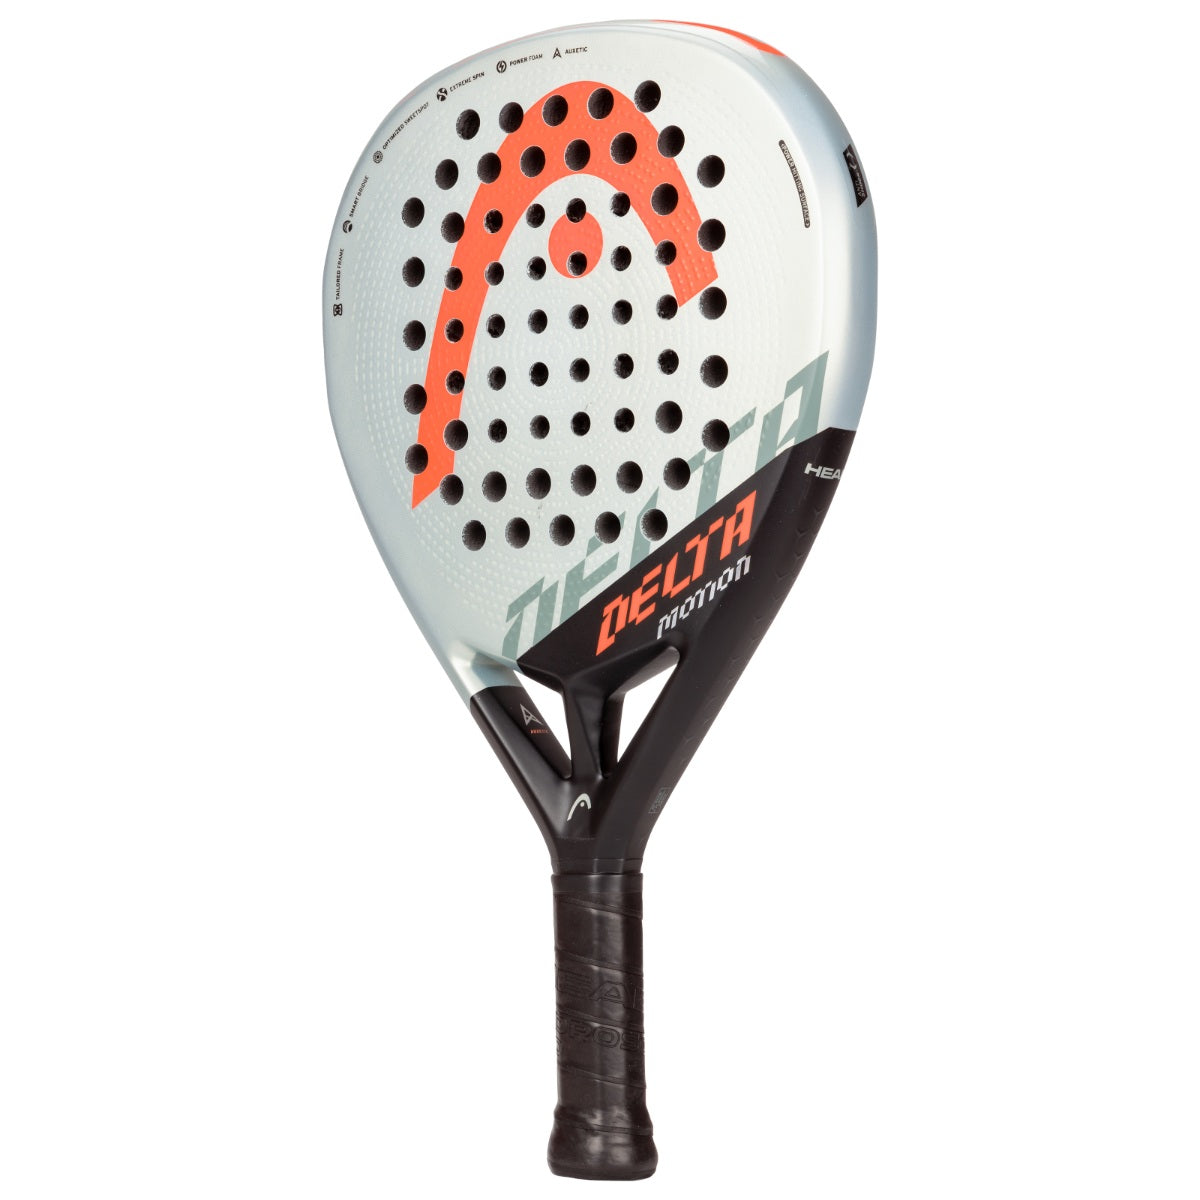 Main image of the Head Delta Motion Padel Racet which is on sale at thepadelshop.co.nz